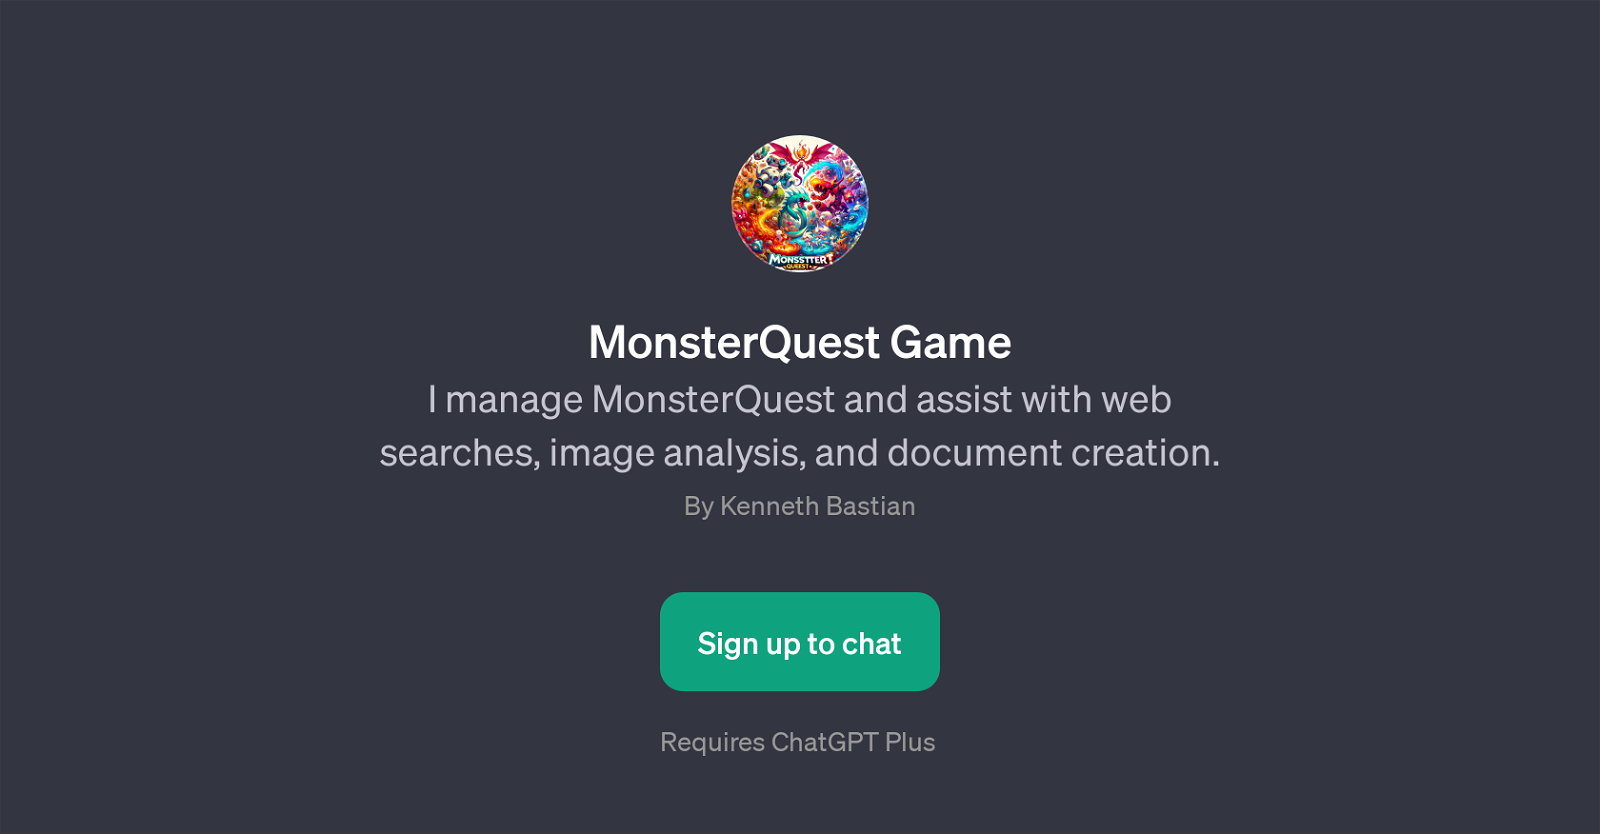 MonsterQuest Game website